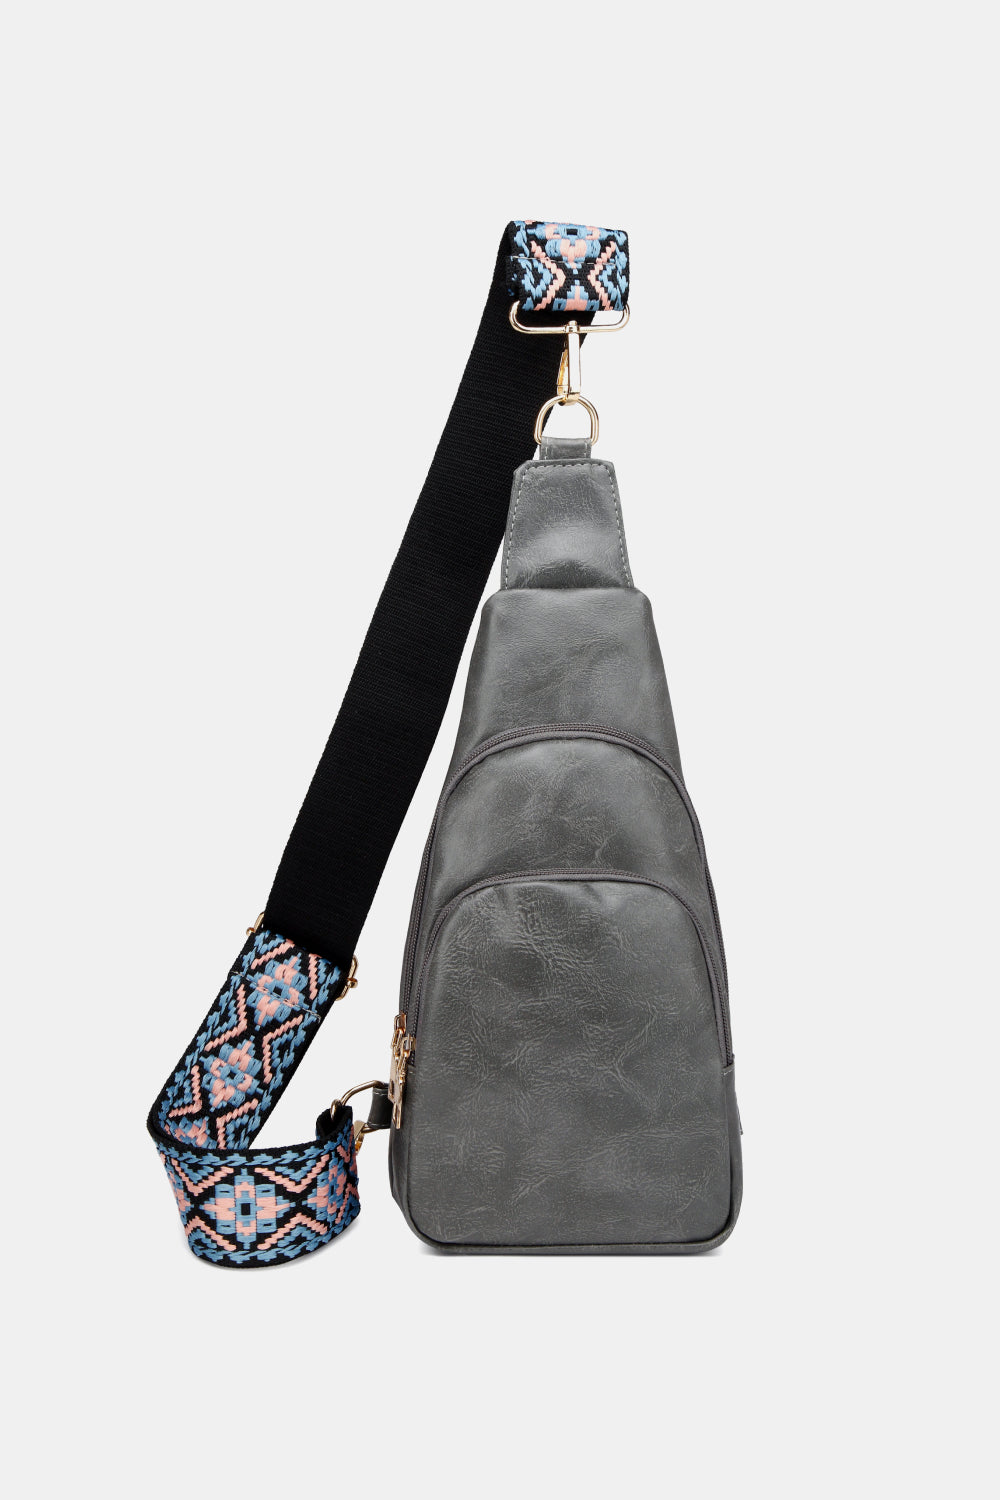 PU Leather Sling Bag Print on any thing USA/STOD clothes